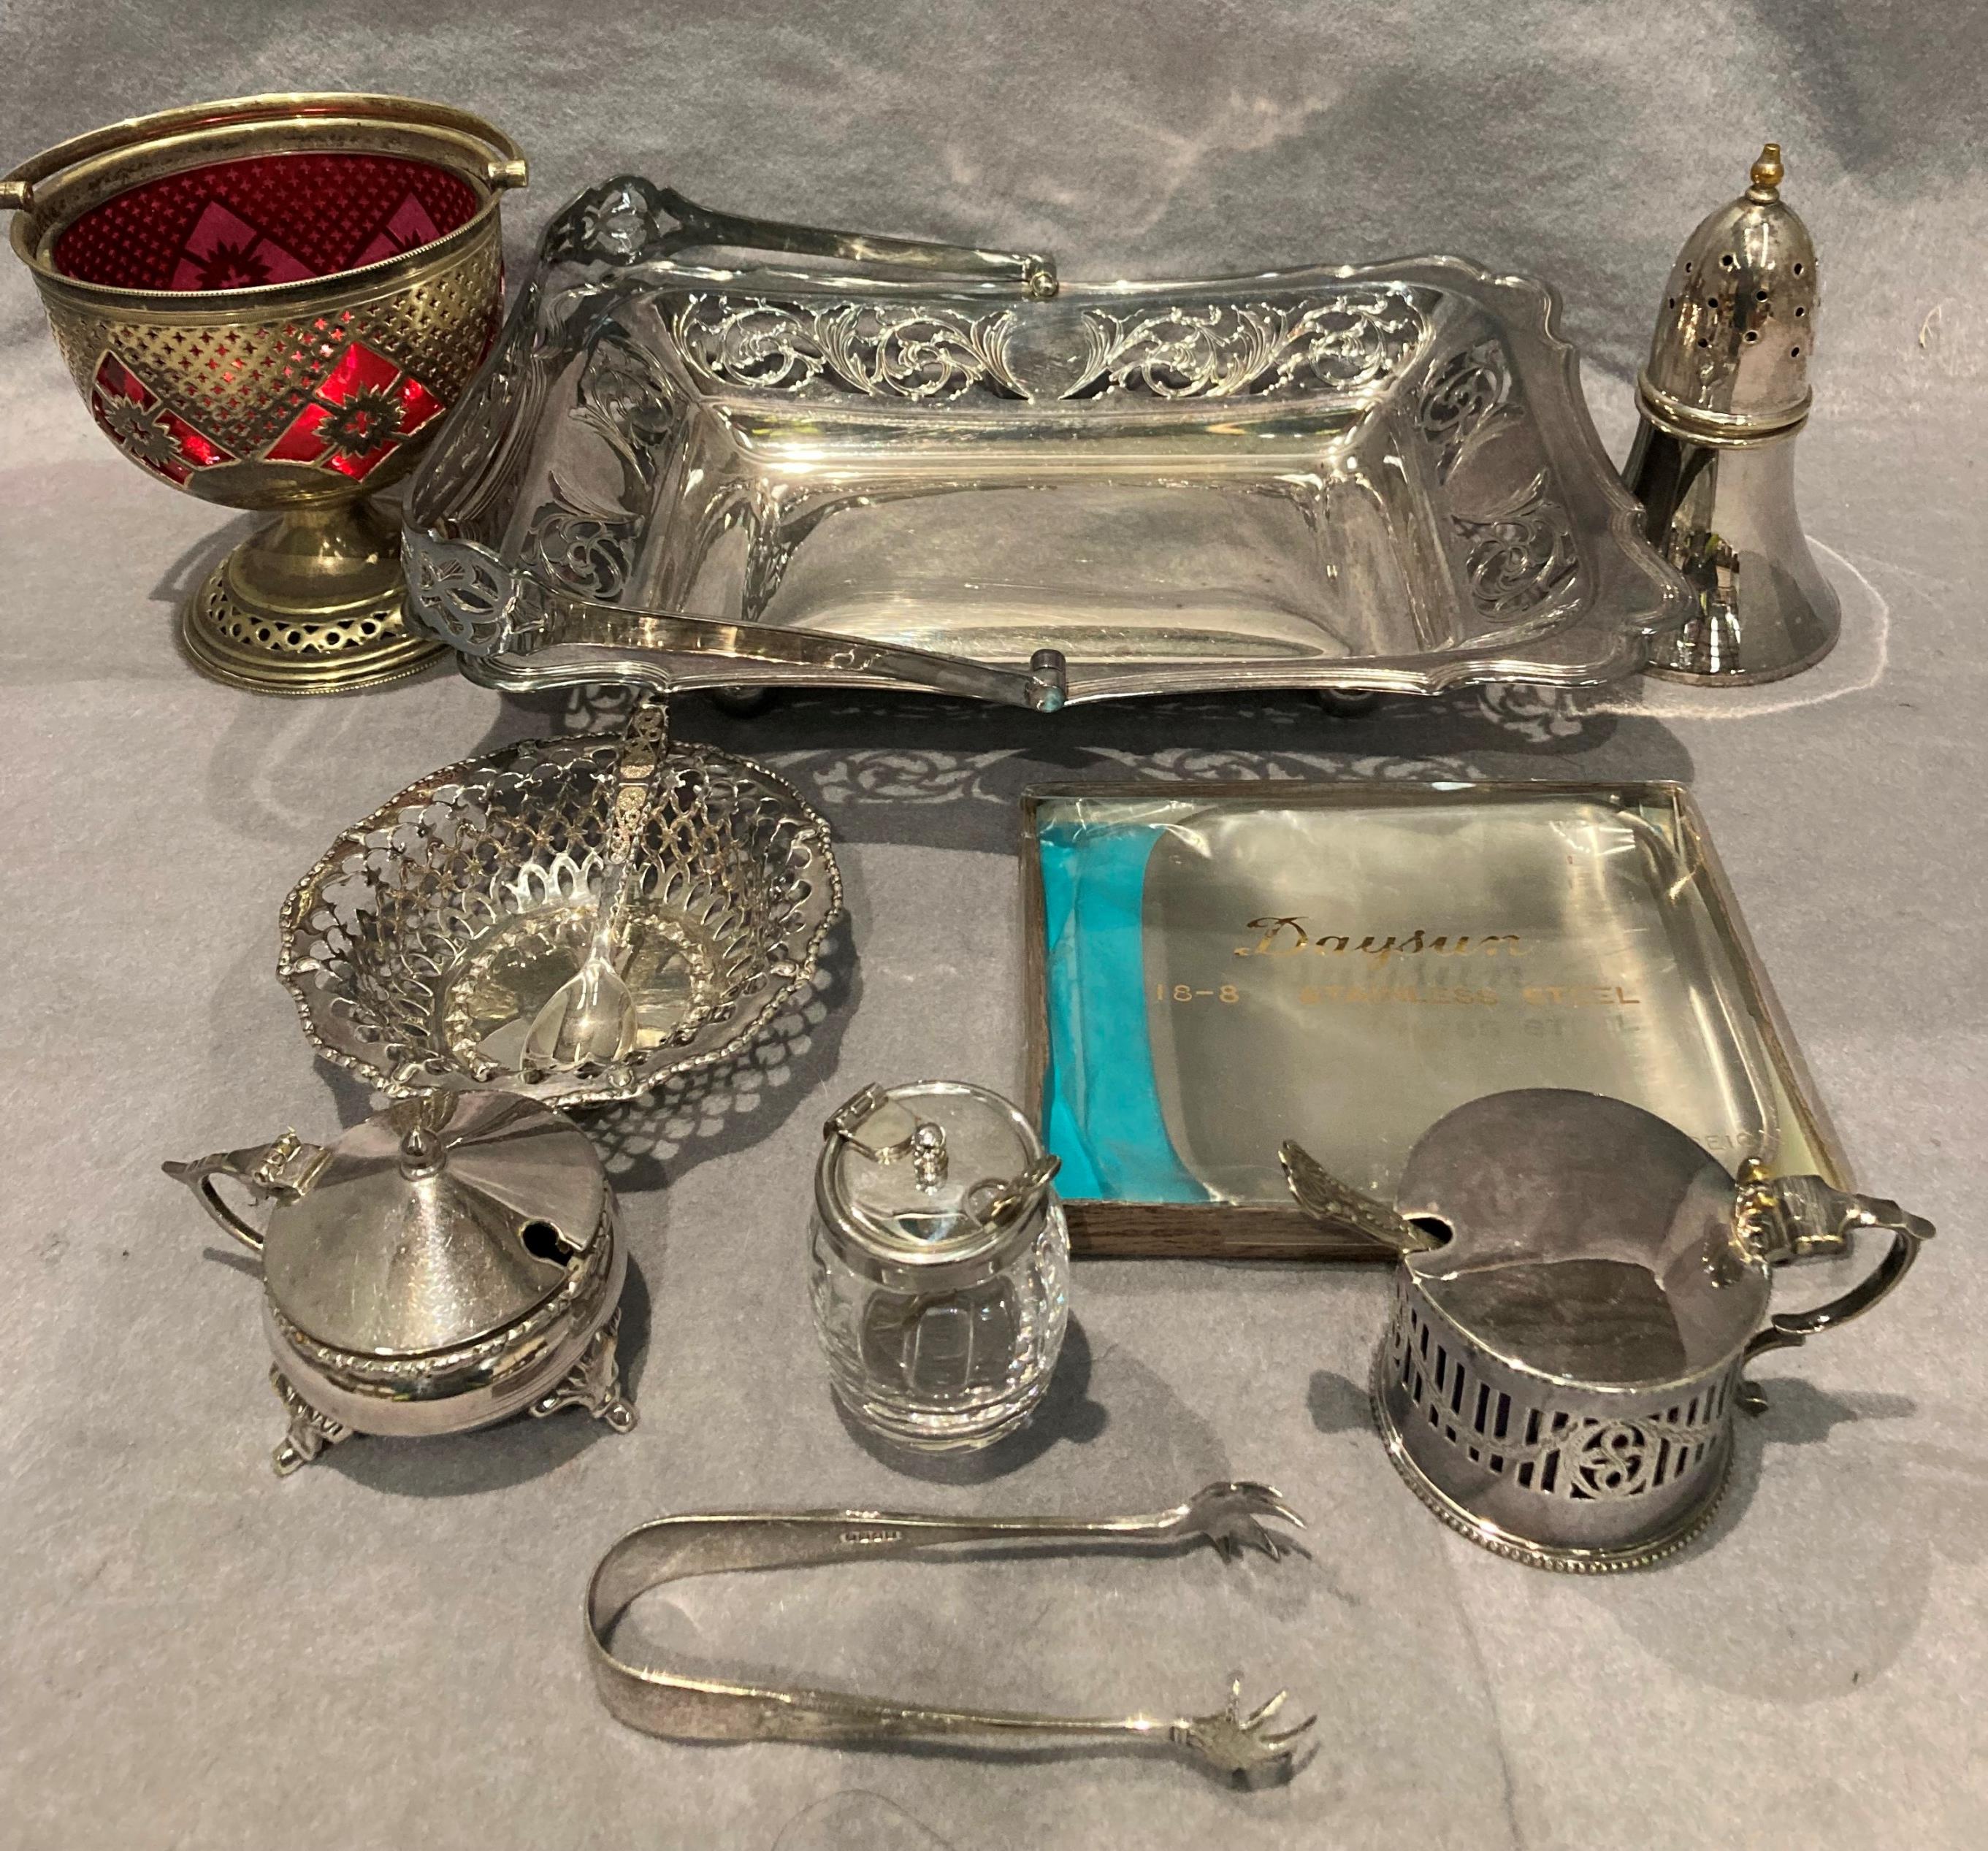 Contents to tray - a quantity of plated items, single handled tray, sugar shaker,